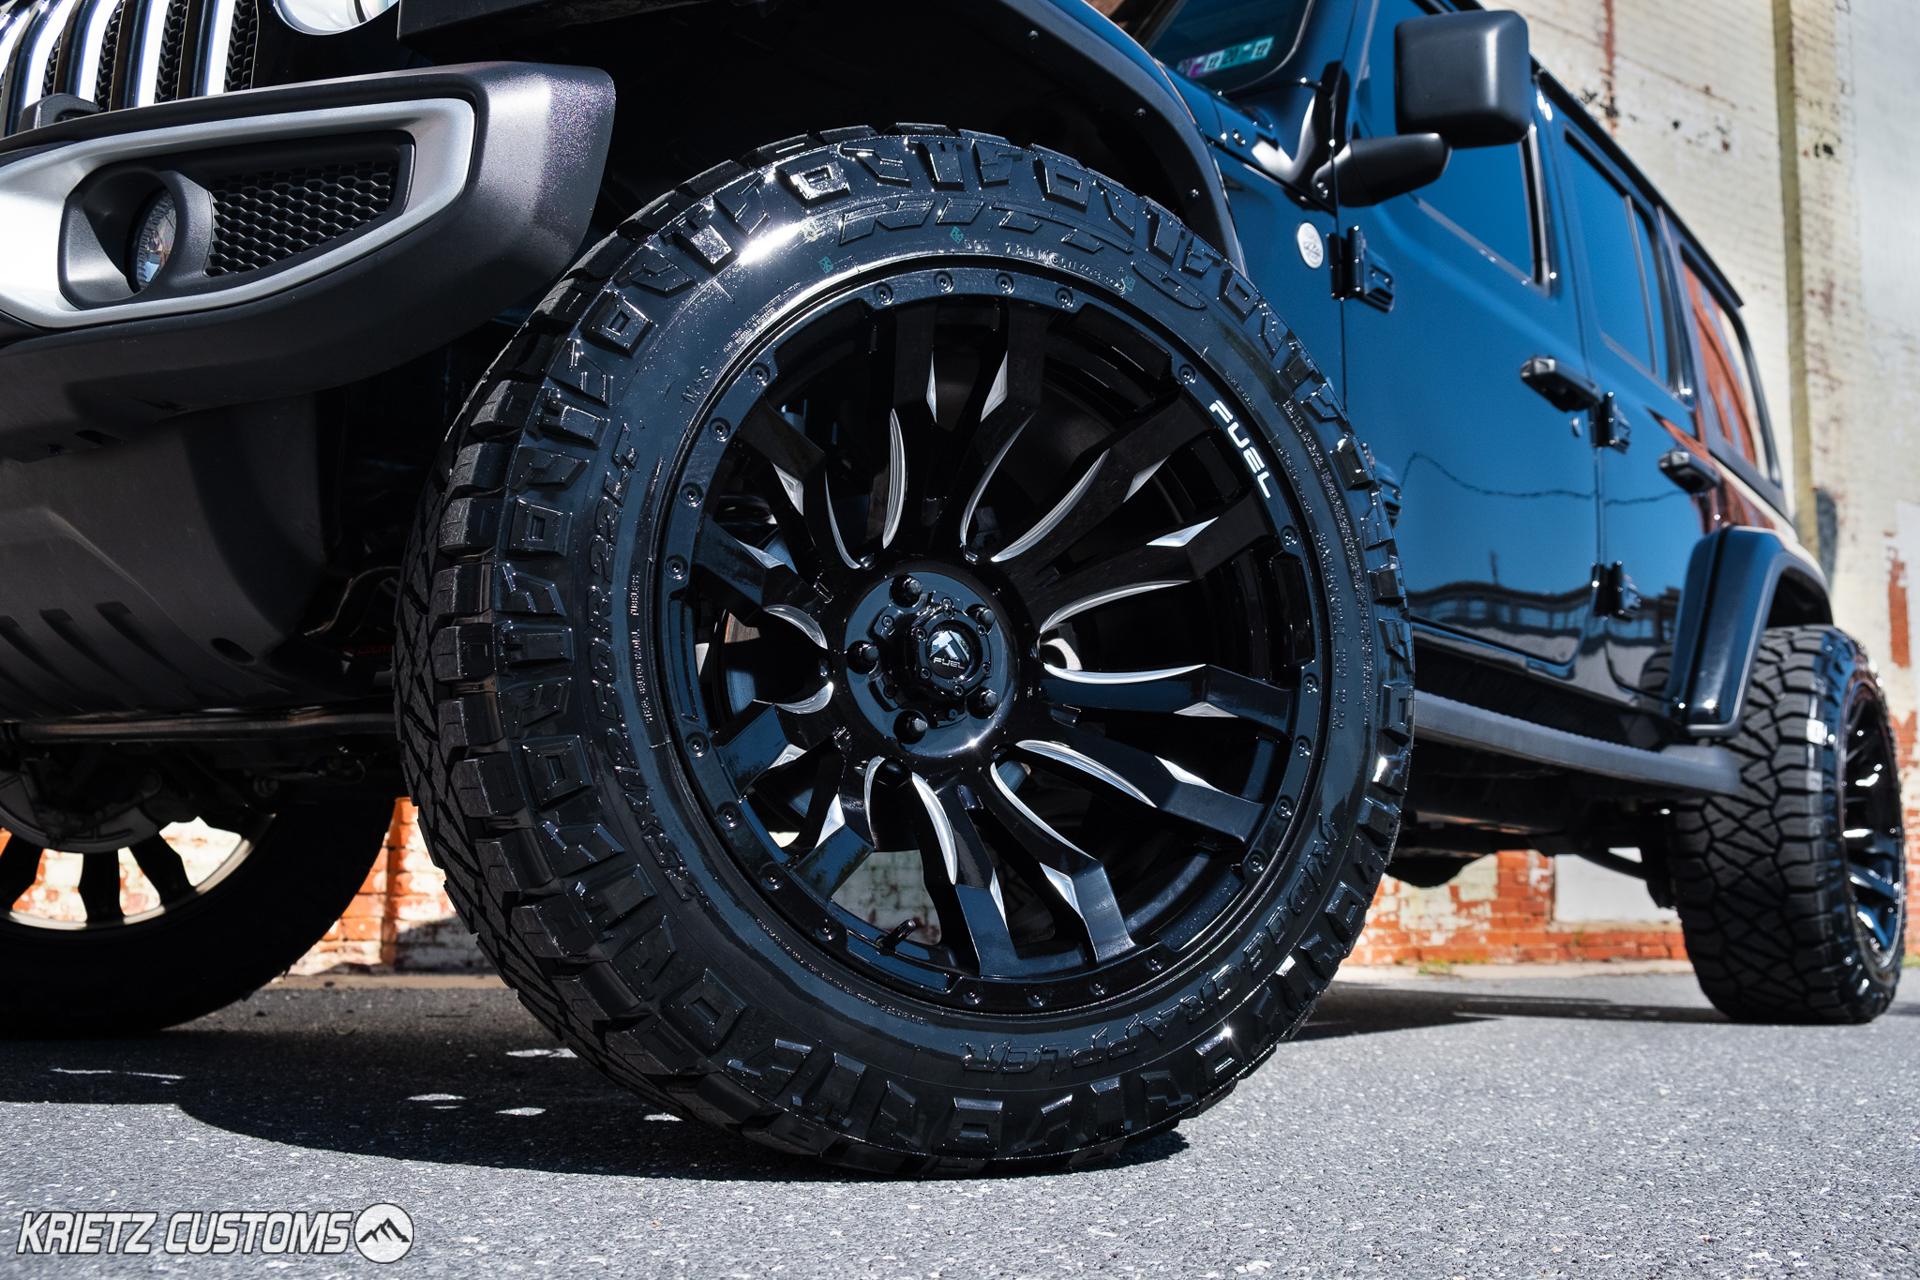 Lifted 2019 Jeep Wrangler with 22×12 Fuel Blitz Wheels and 2.5 Inch